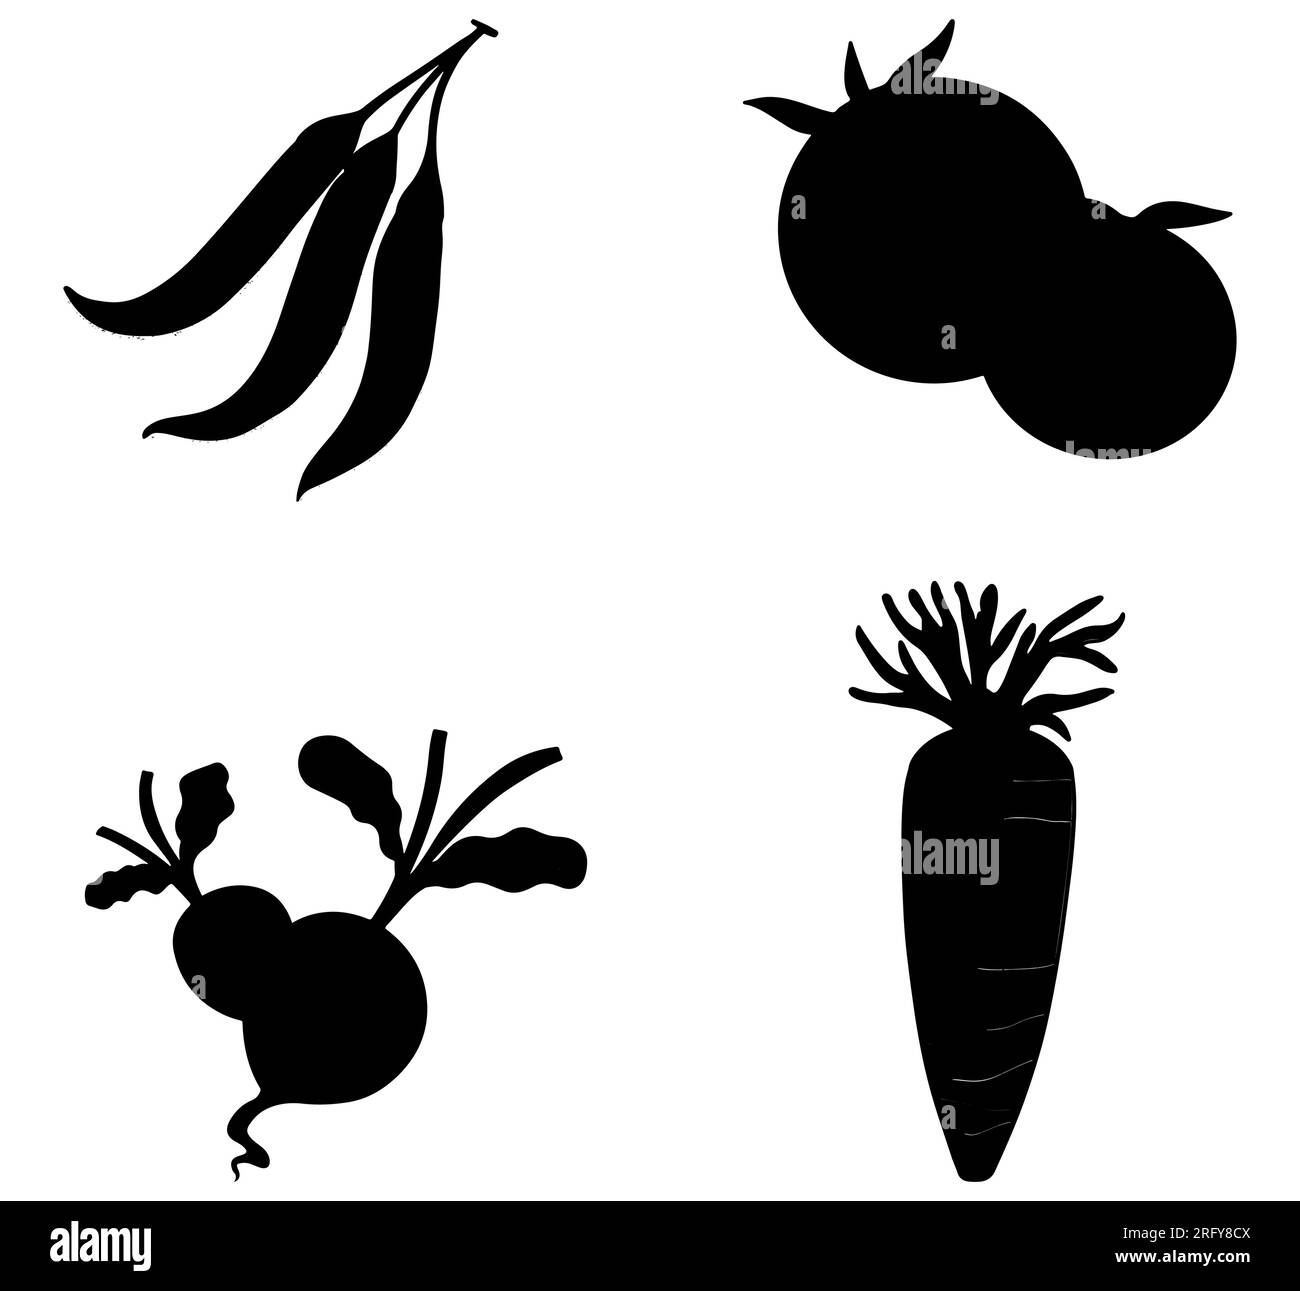 Black silhouettes of vegetables, carrots, beetroot, tomatoes, and peas, healthy veggies vector isolated on white background Stock Vector